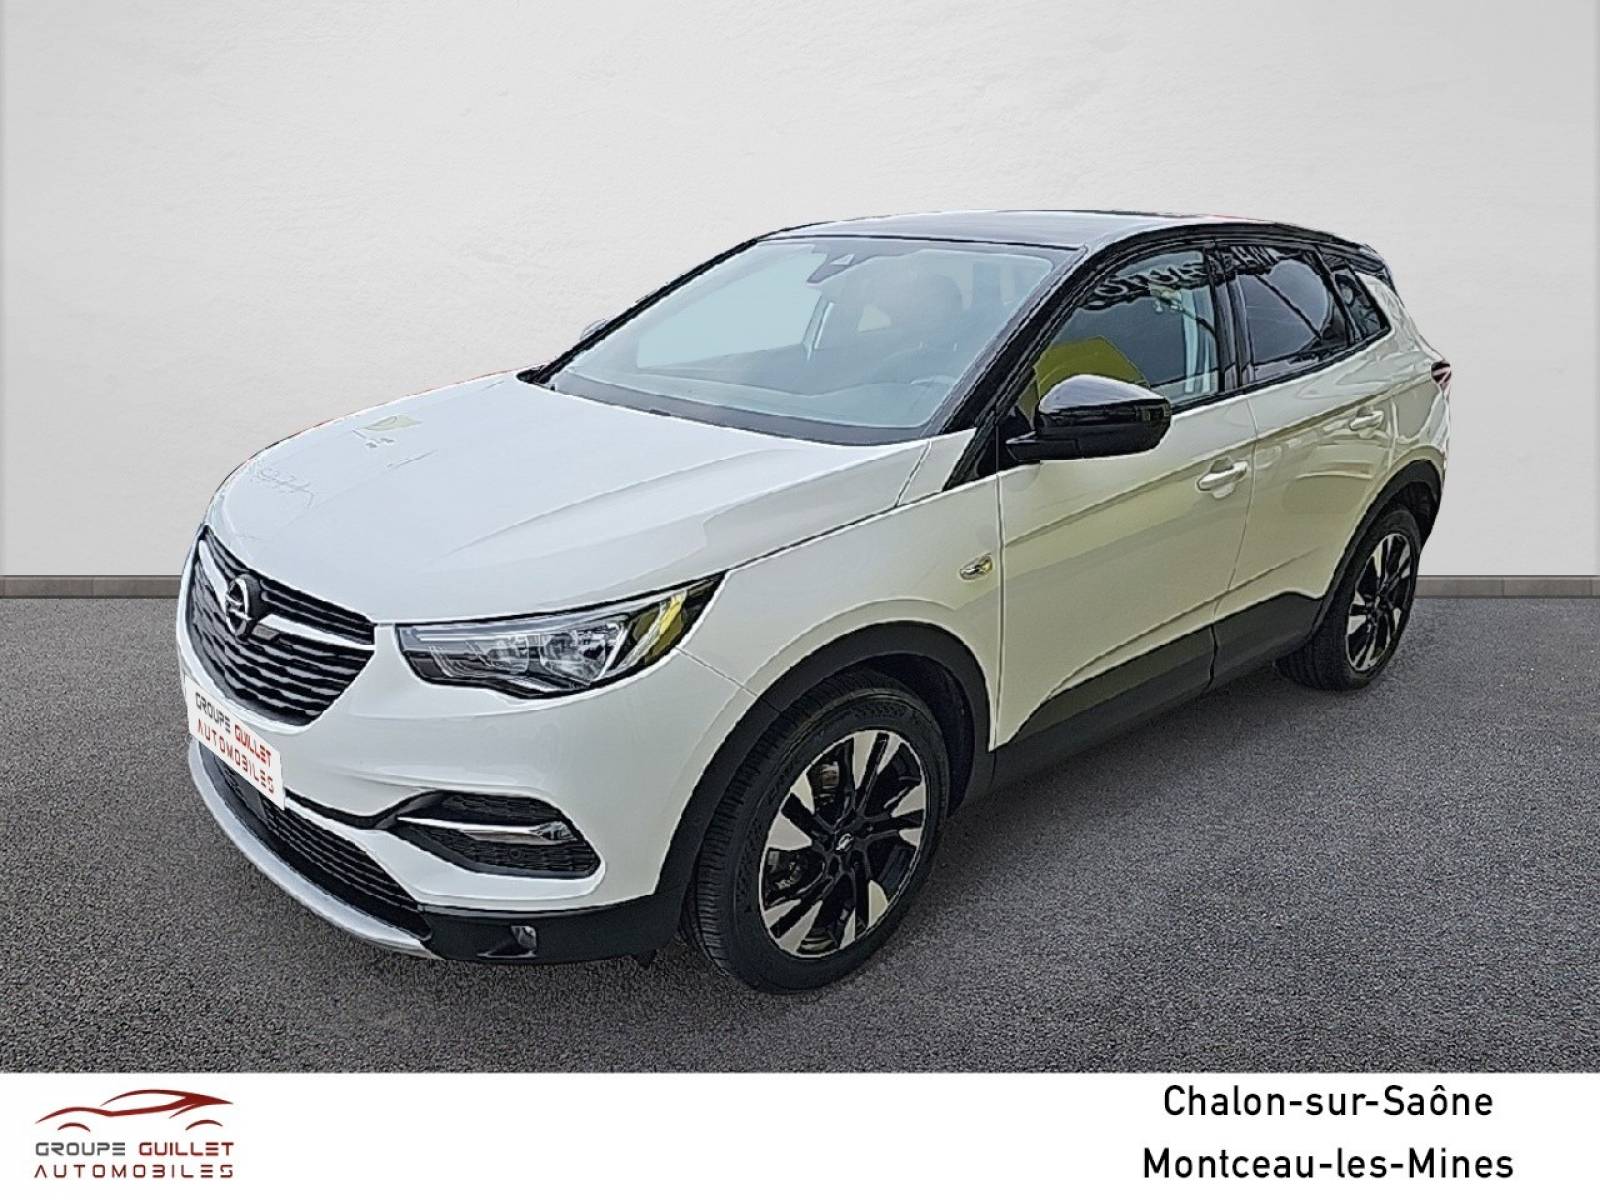 OPEL Grandland X 1.2 Turbo 130 ch - véhicule d'occasion - Groupe Guillet - Opel Magicauto Chalon - 71380 - Saint-Marcel - 1